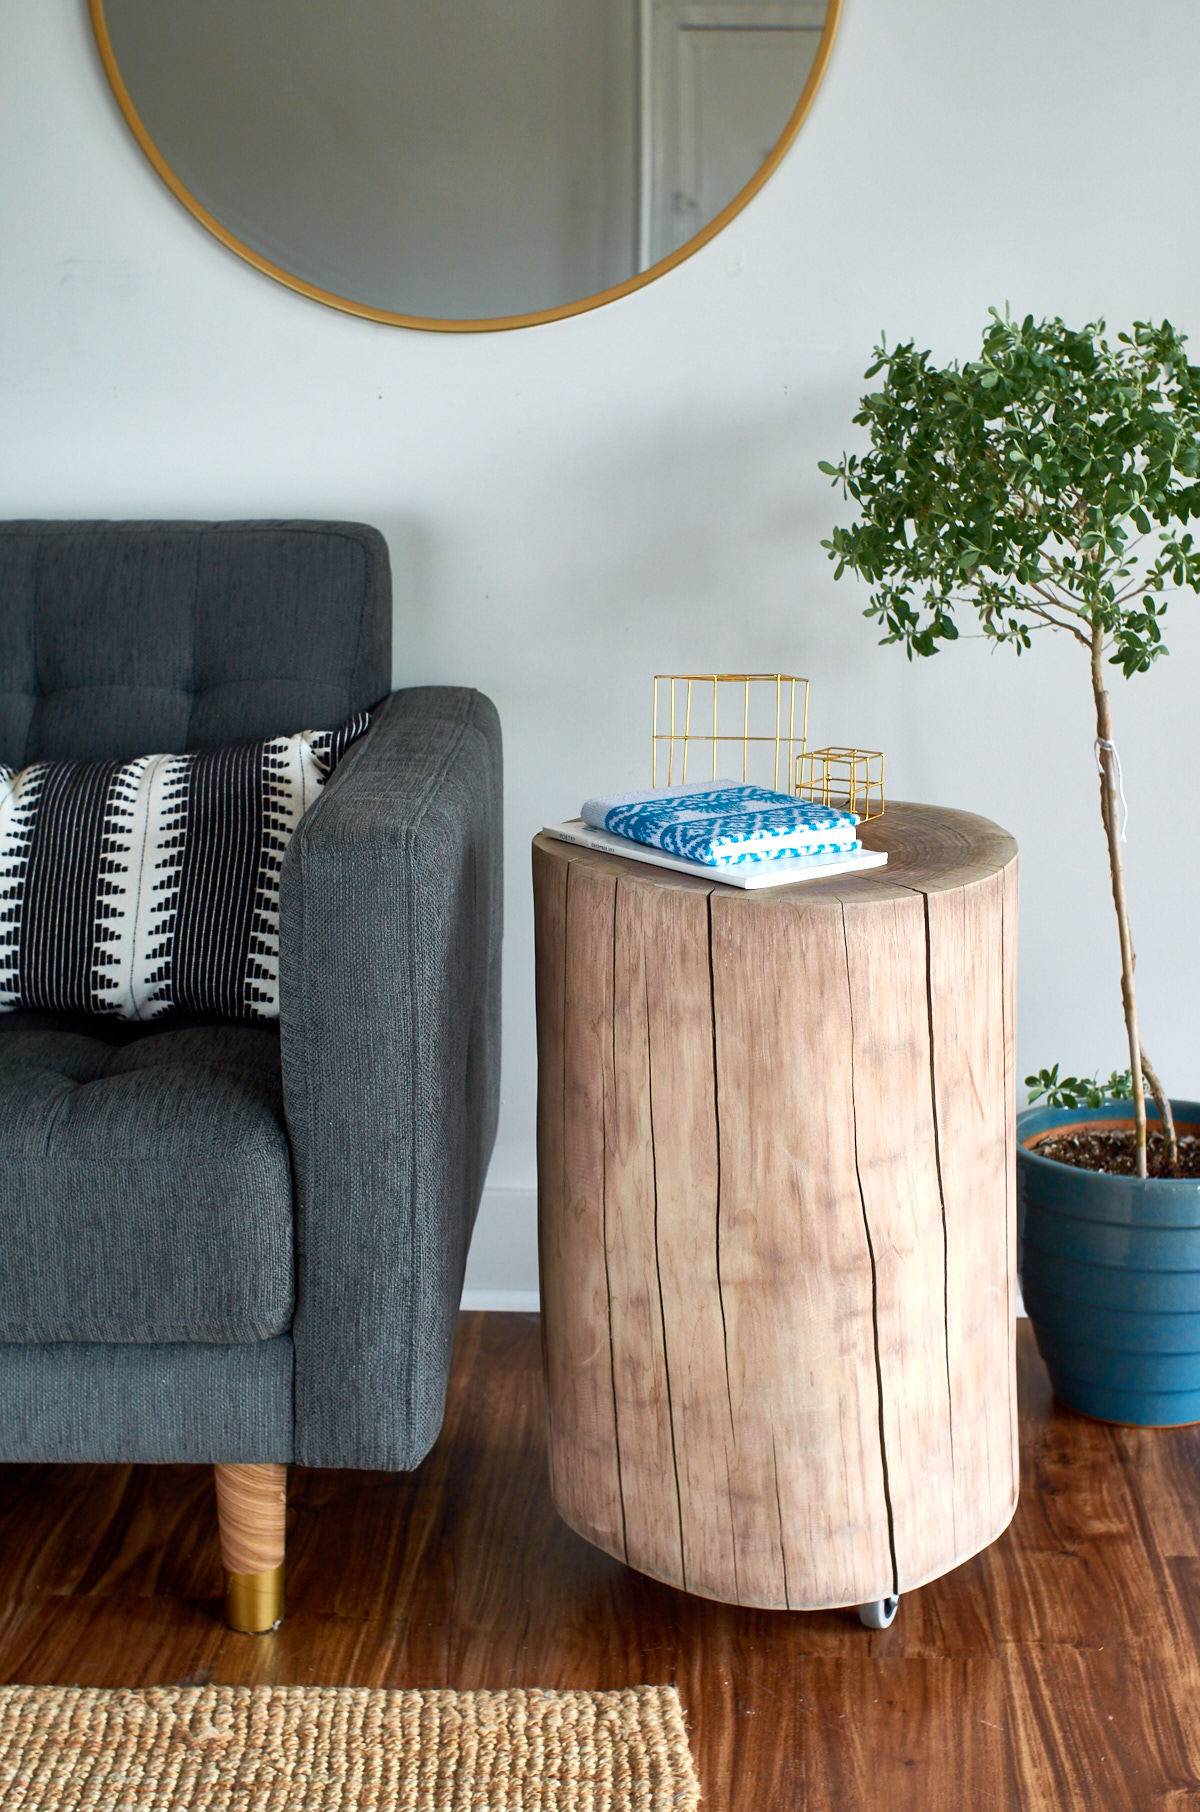 A grey chair with a wooden round side table nearby.